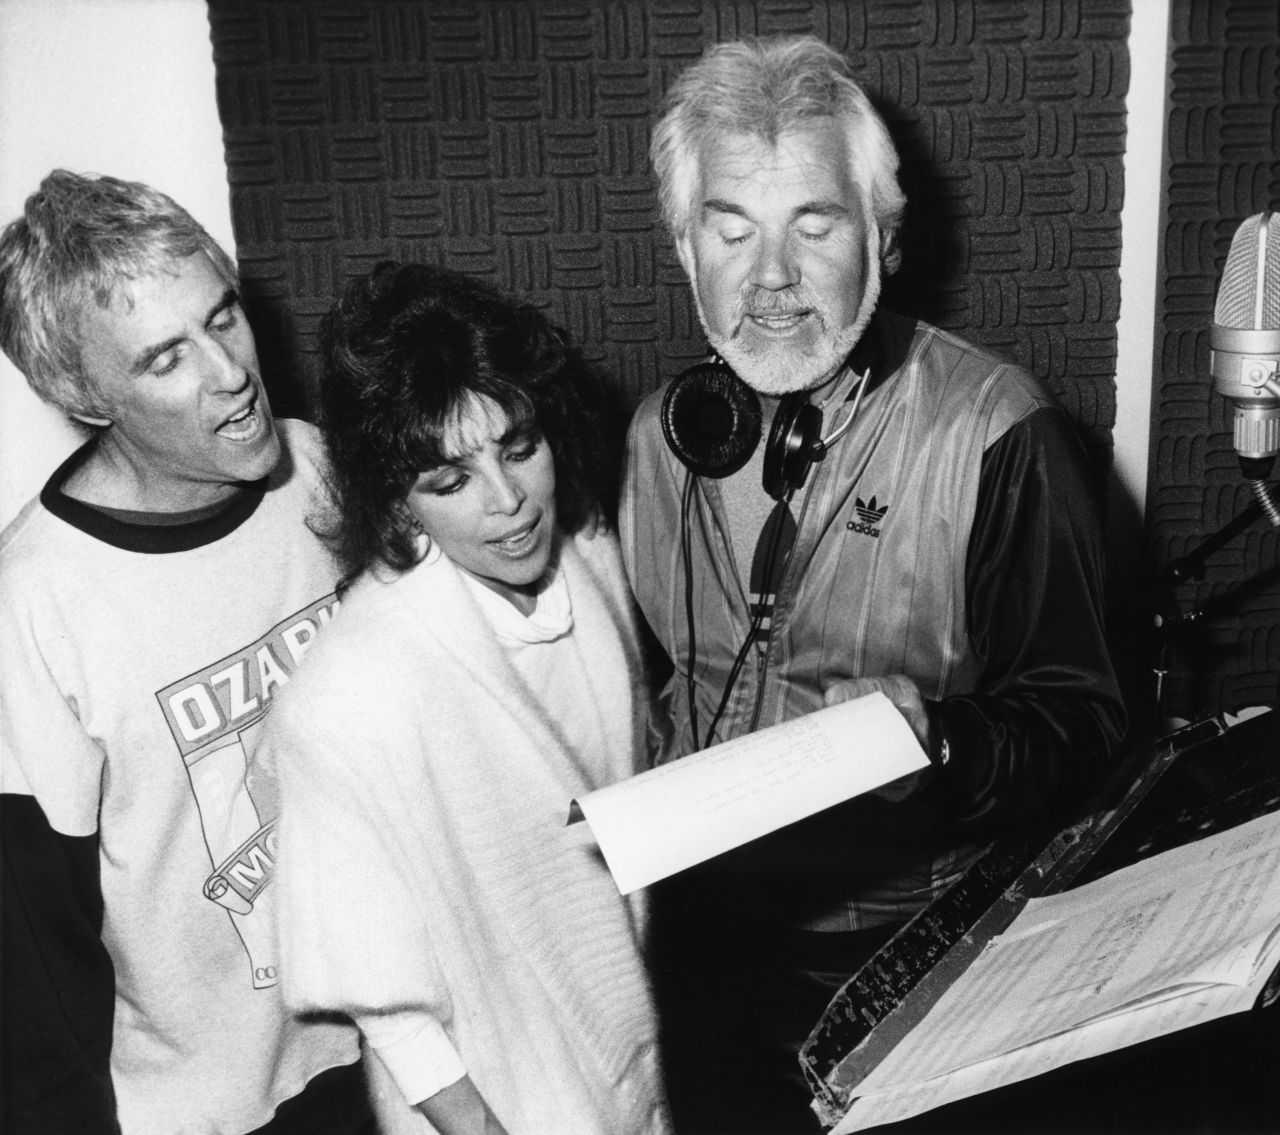 From left: Burt Bacharach, Carole Bayer Sager and Rogers record music for the film "Tough Guys" in 1986.